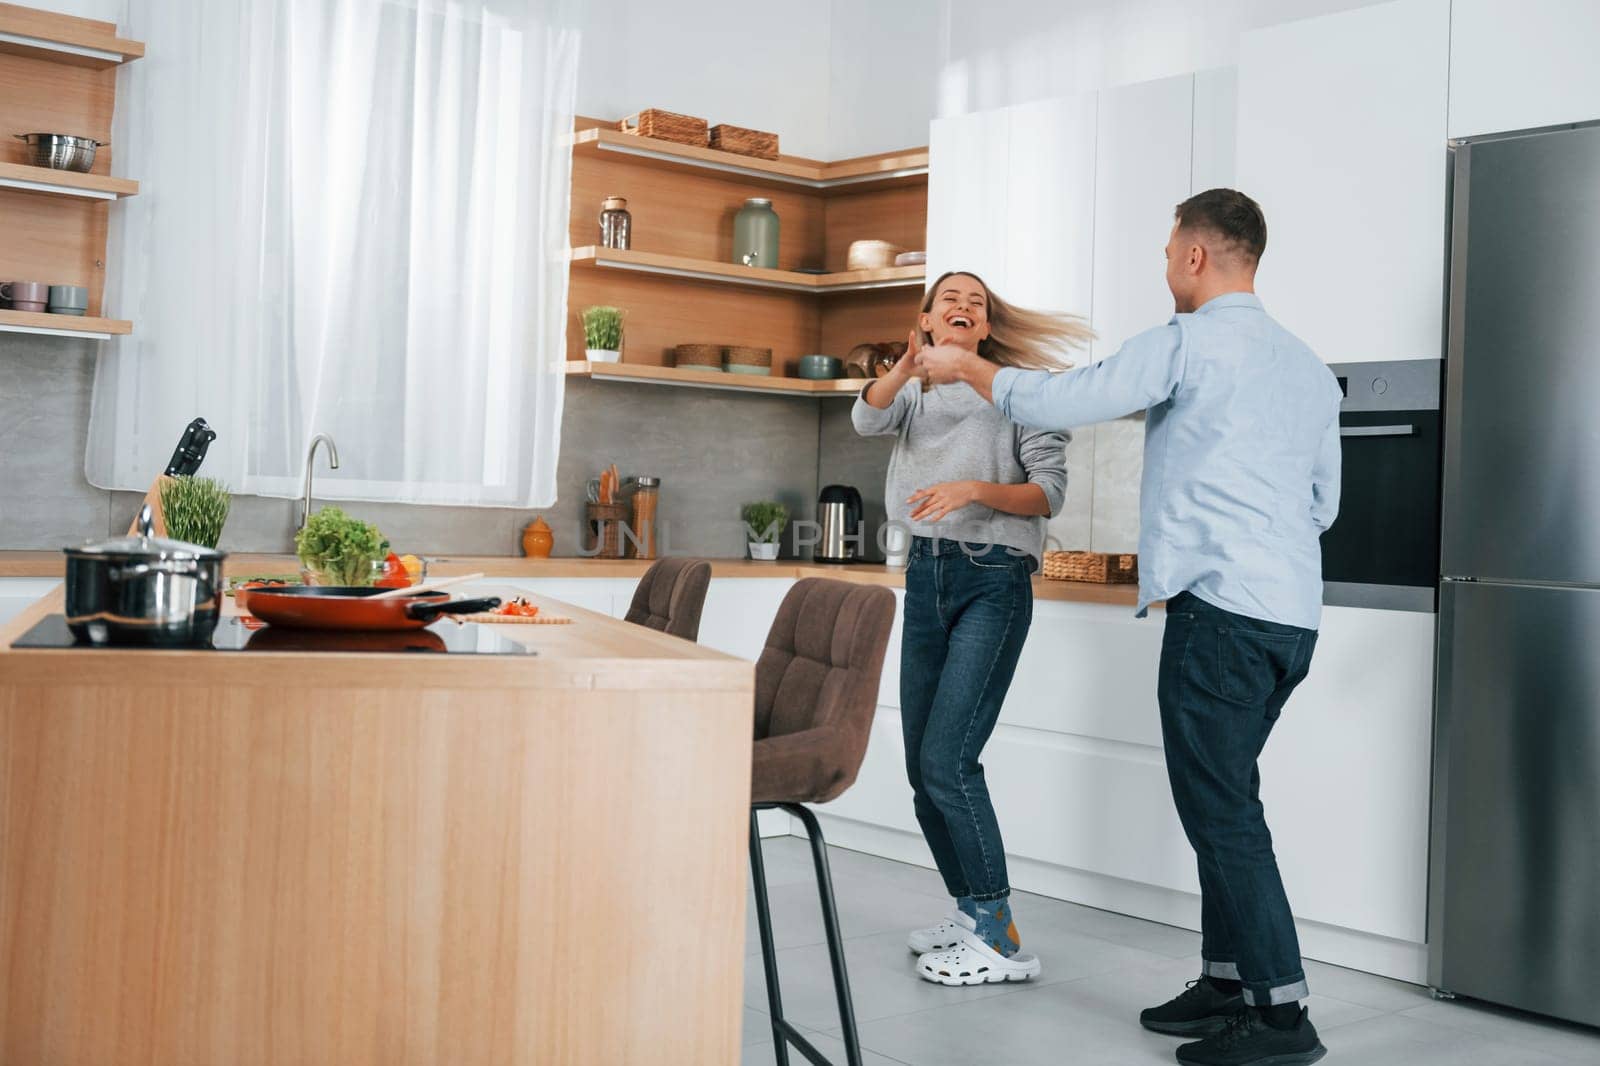 Dancing together. Couple preparing food at home on the modern kitchen.